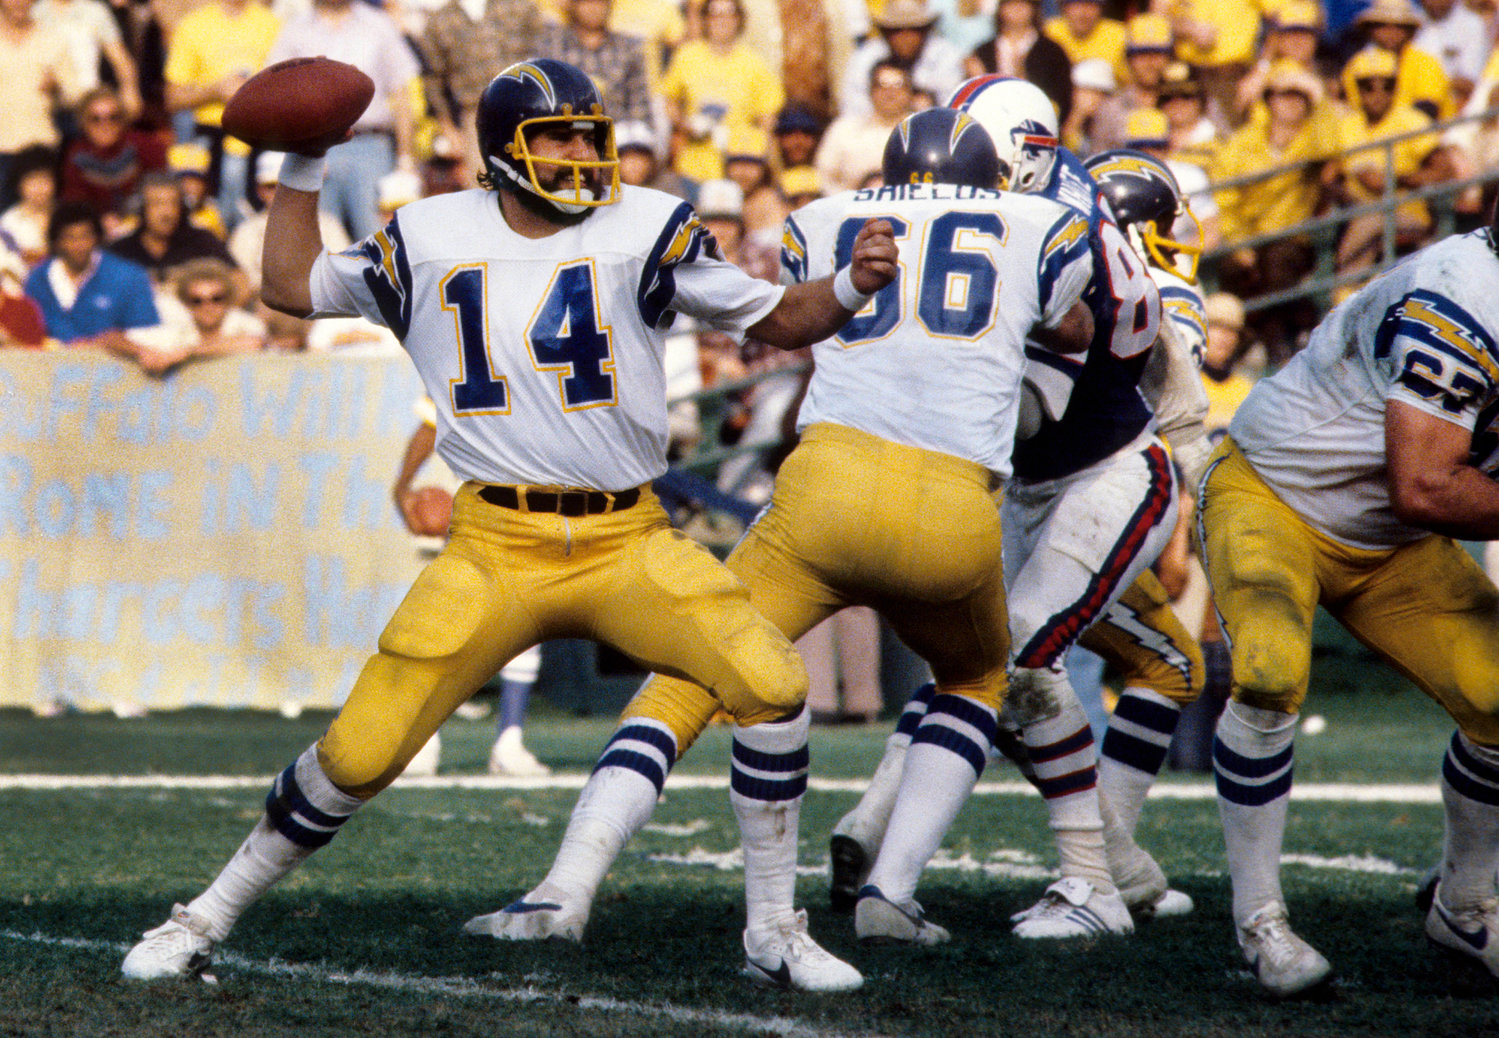 Dan Fouts launching against the Buffalo Bills during the 1980 AFC Divisional Playoff Game. Fouts spent 15 years with the San Diego Chargers, followed by 30 years in broadcasting.